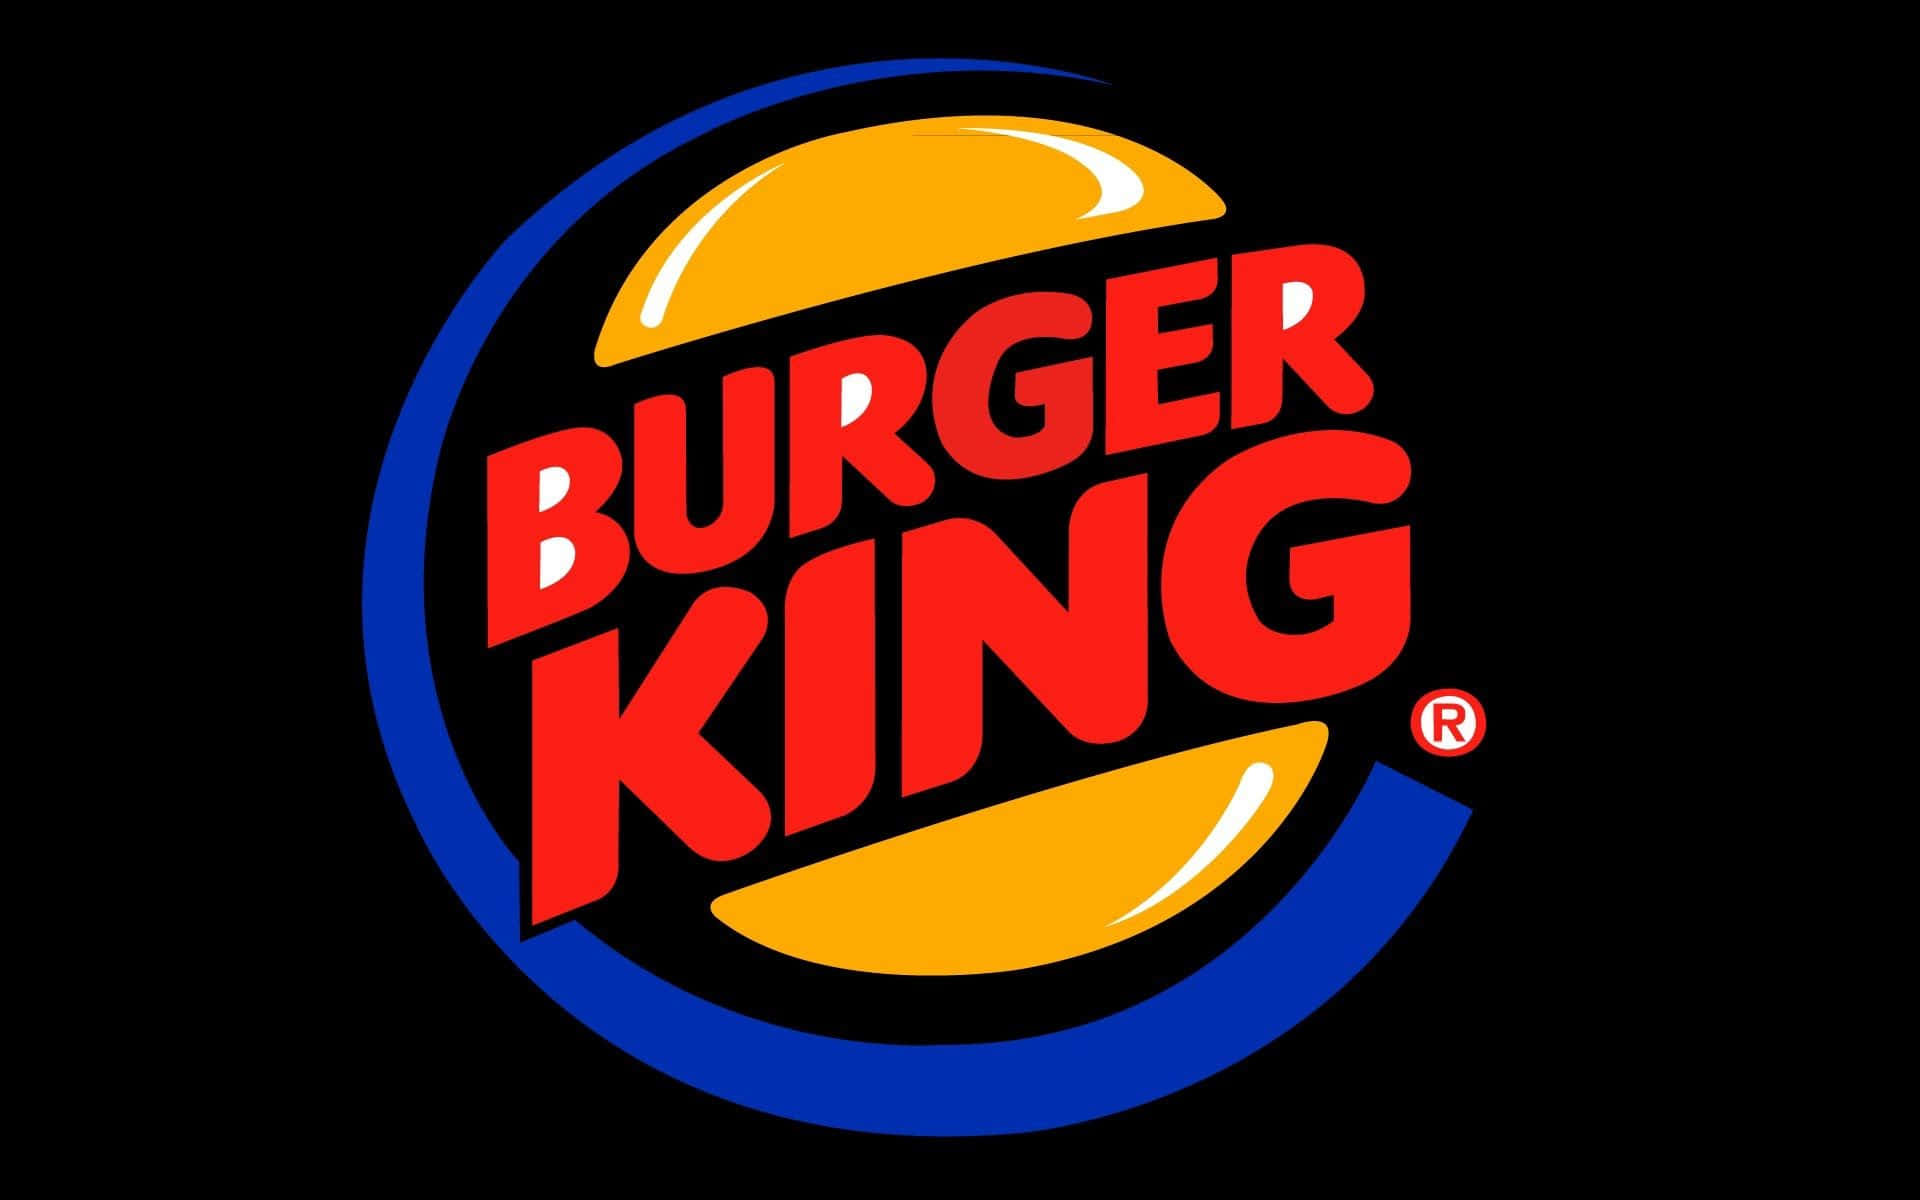 "This delicious meal from Burger King is sure to satisfy!"